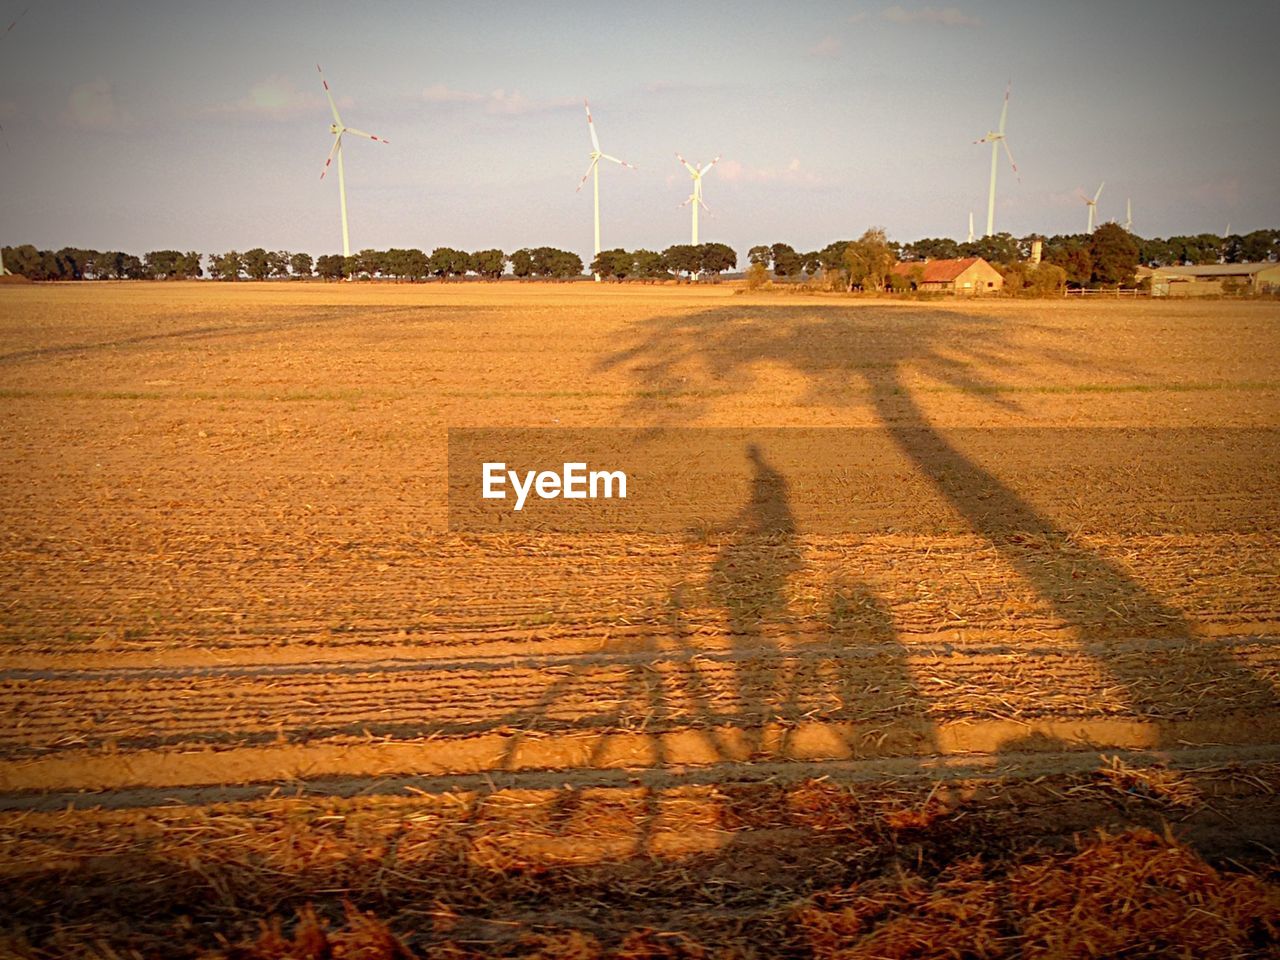 Shadow of person riding bicycle on field